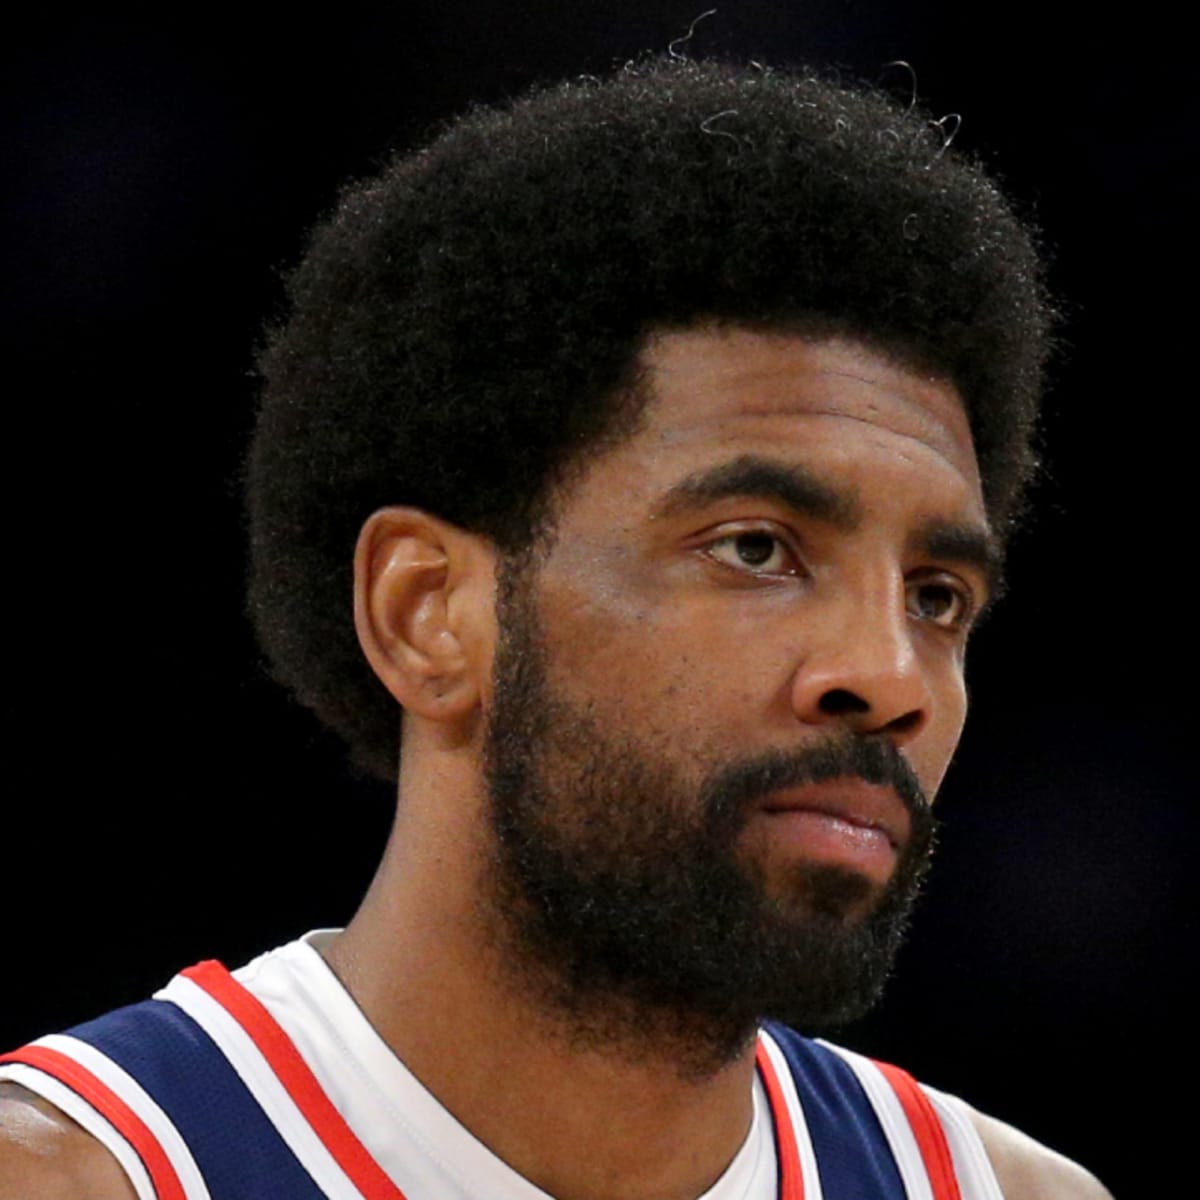 Who Owns New York? Brooklyn Nets' Kyrie Irving Won't Concede to Knicks -  Sports Illustrated New York Knicks News, Analysis and More